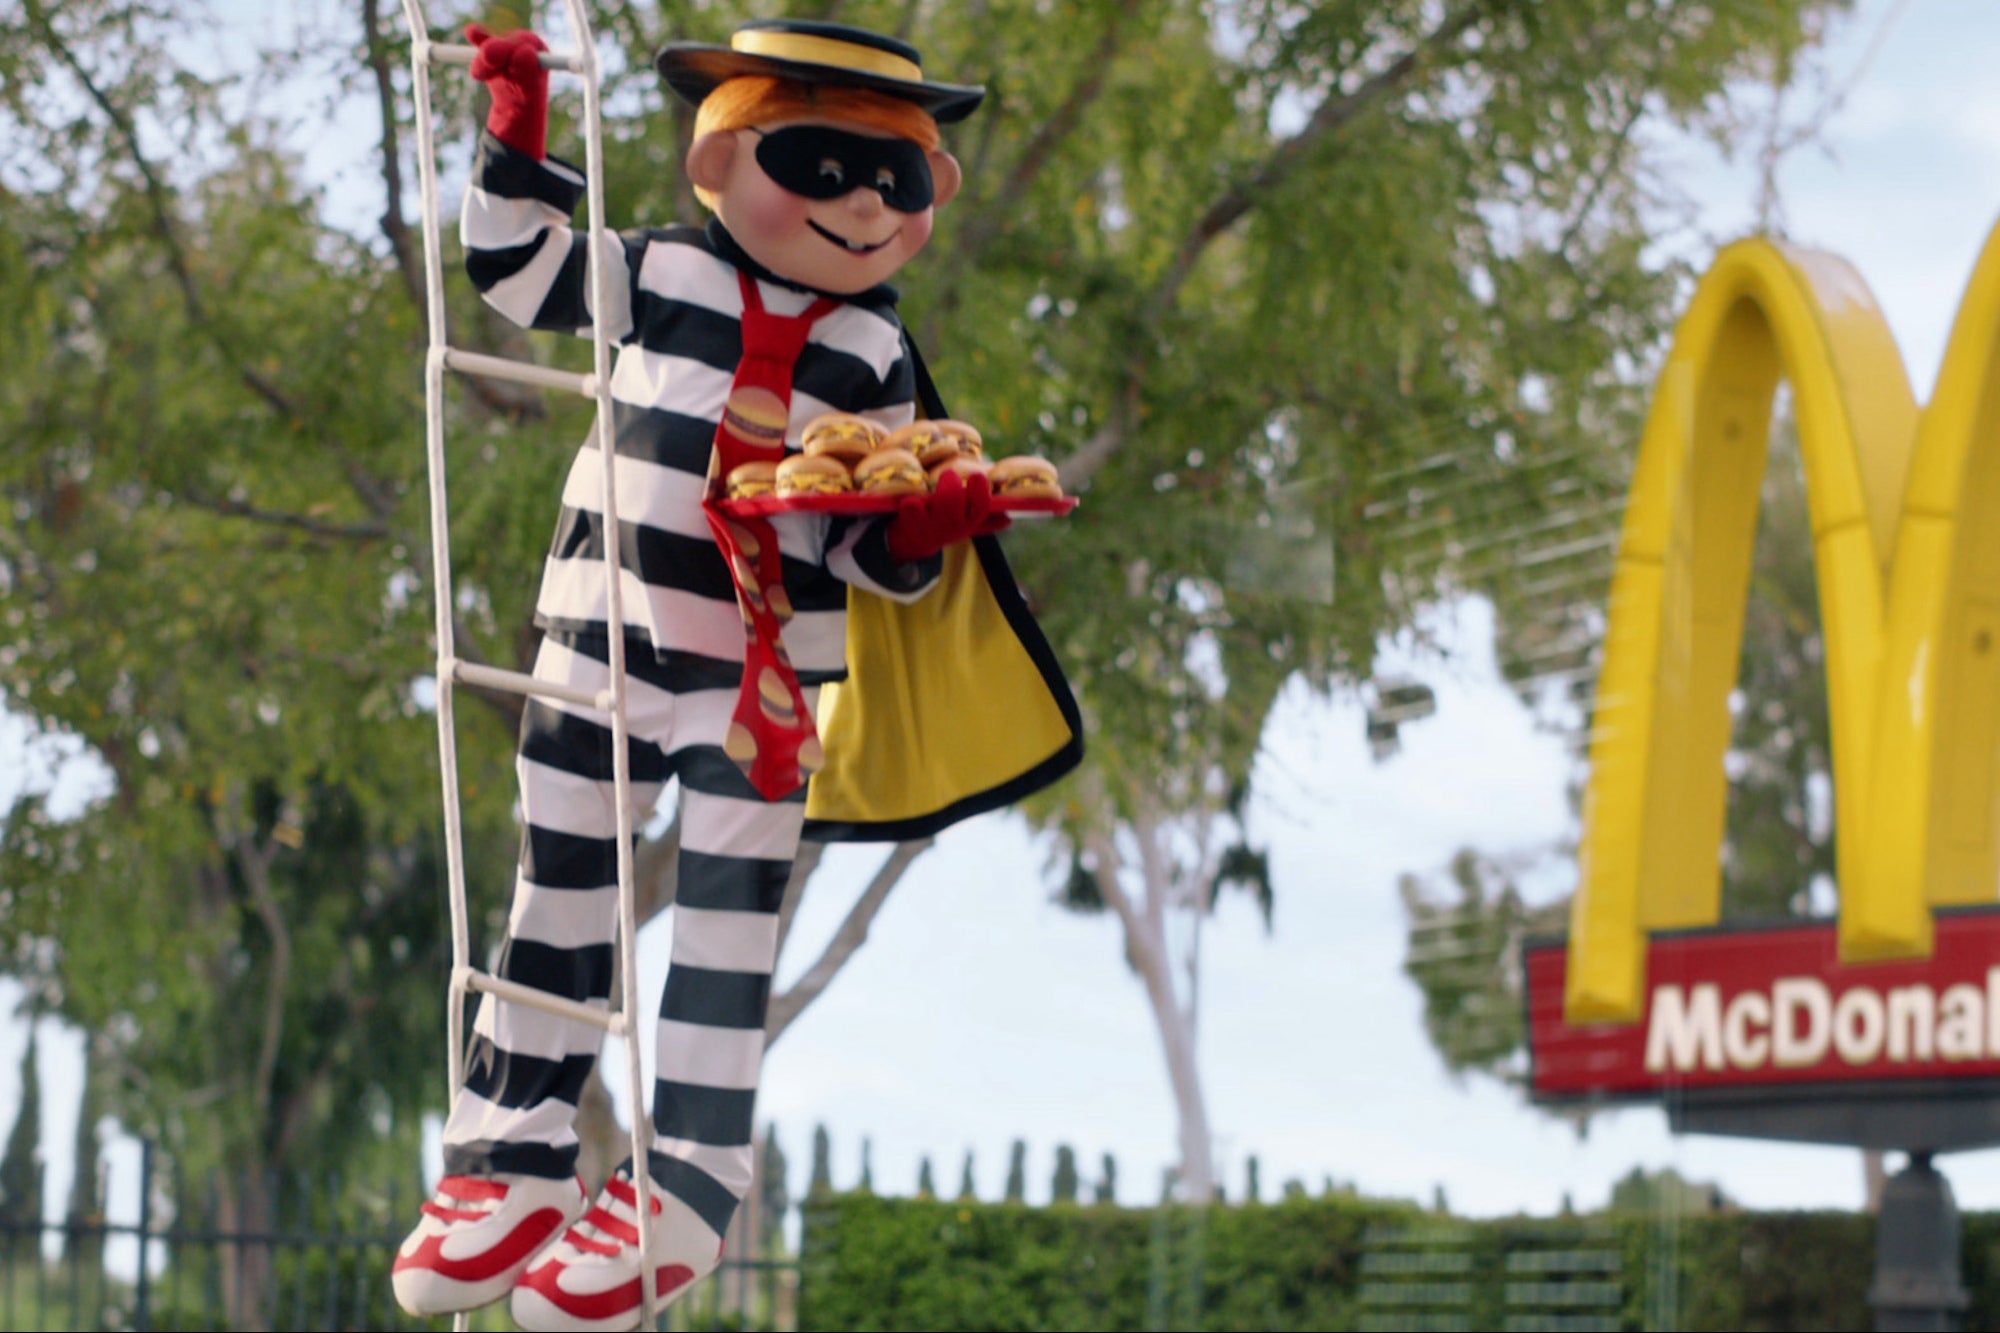 McDonald's Hamburglar Comes Out of Hiding to Promote Changes to Burgers